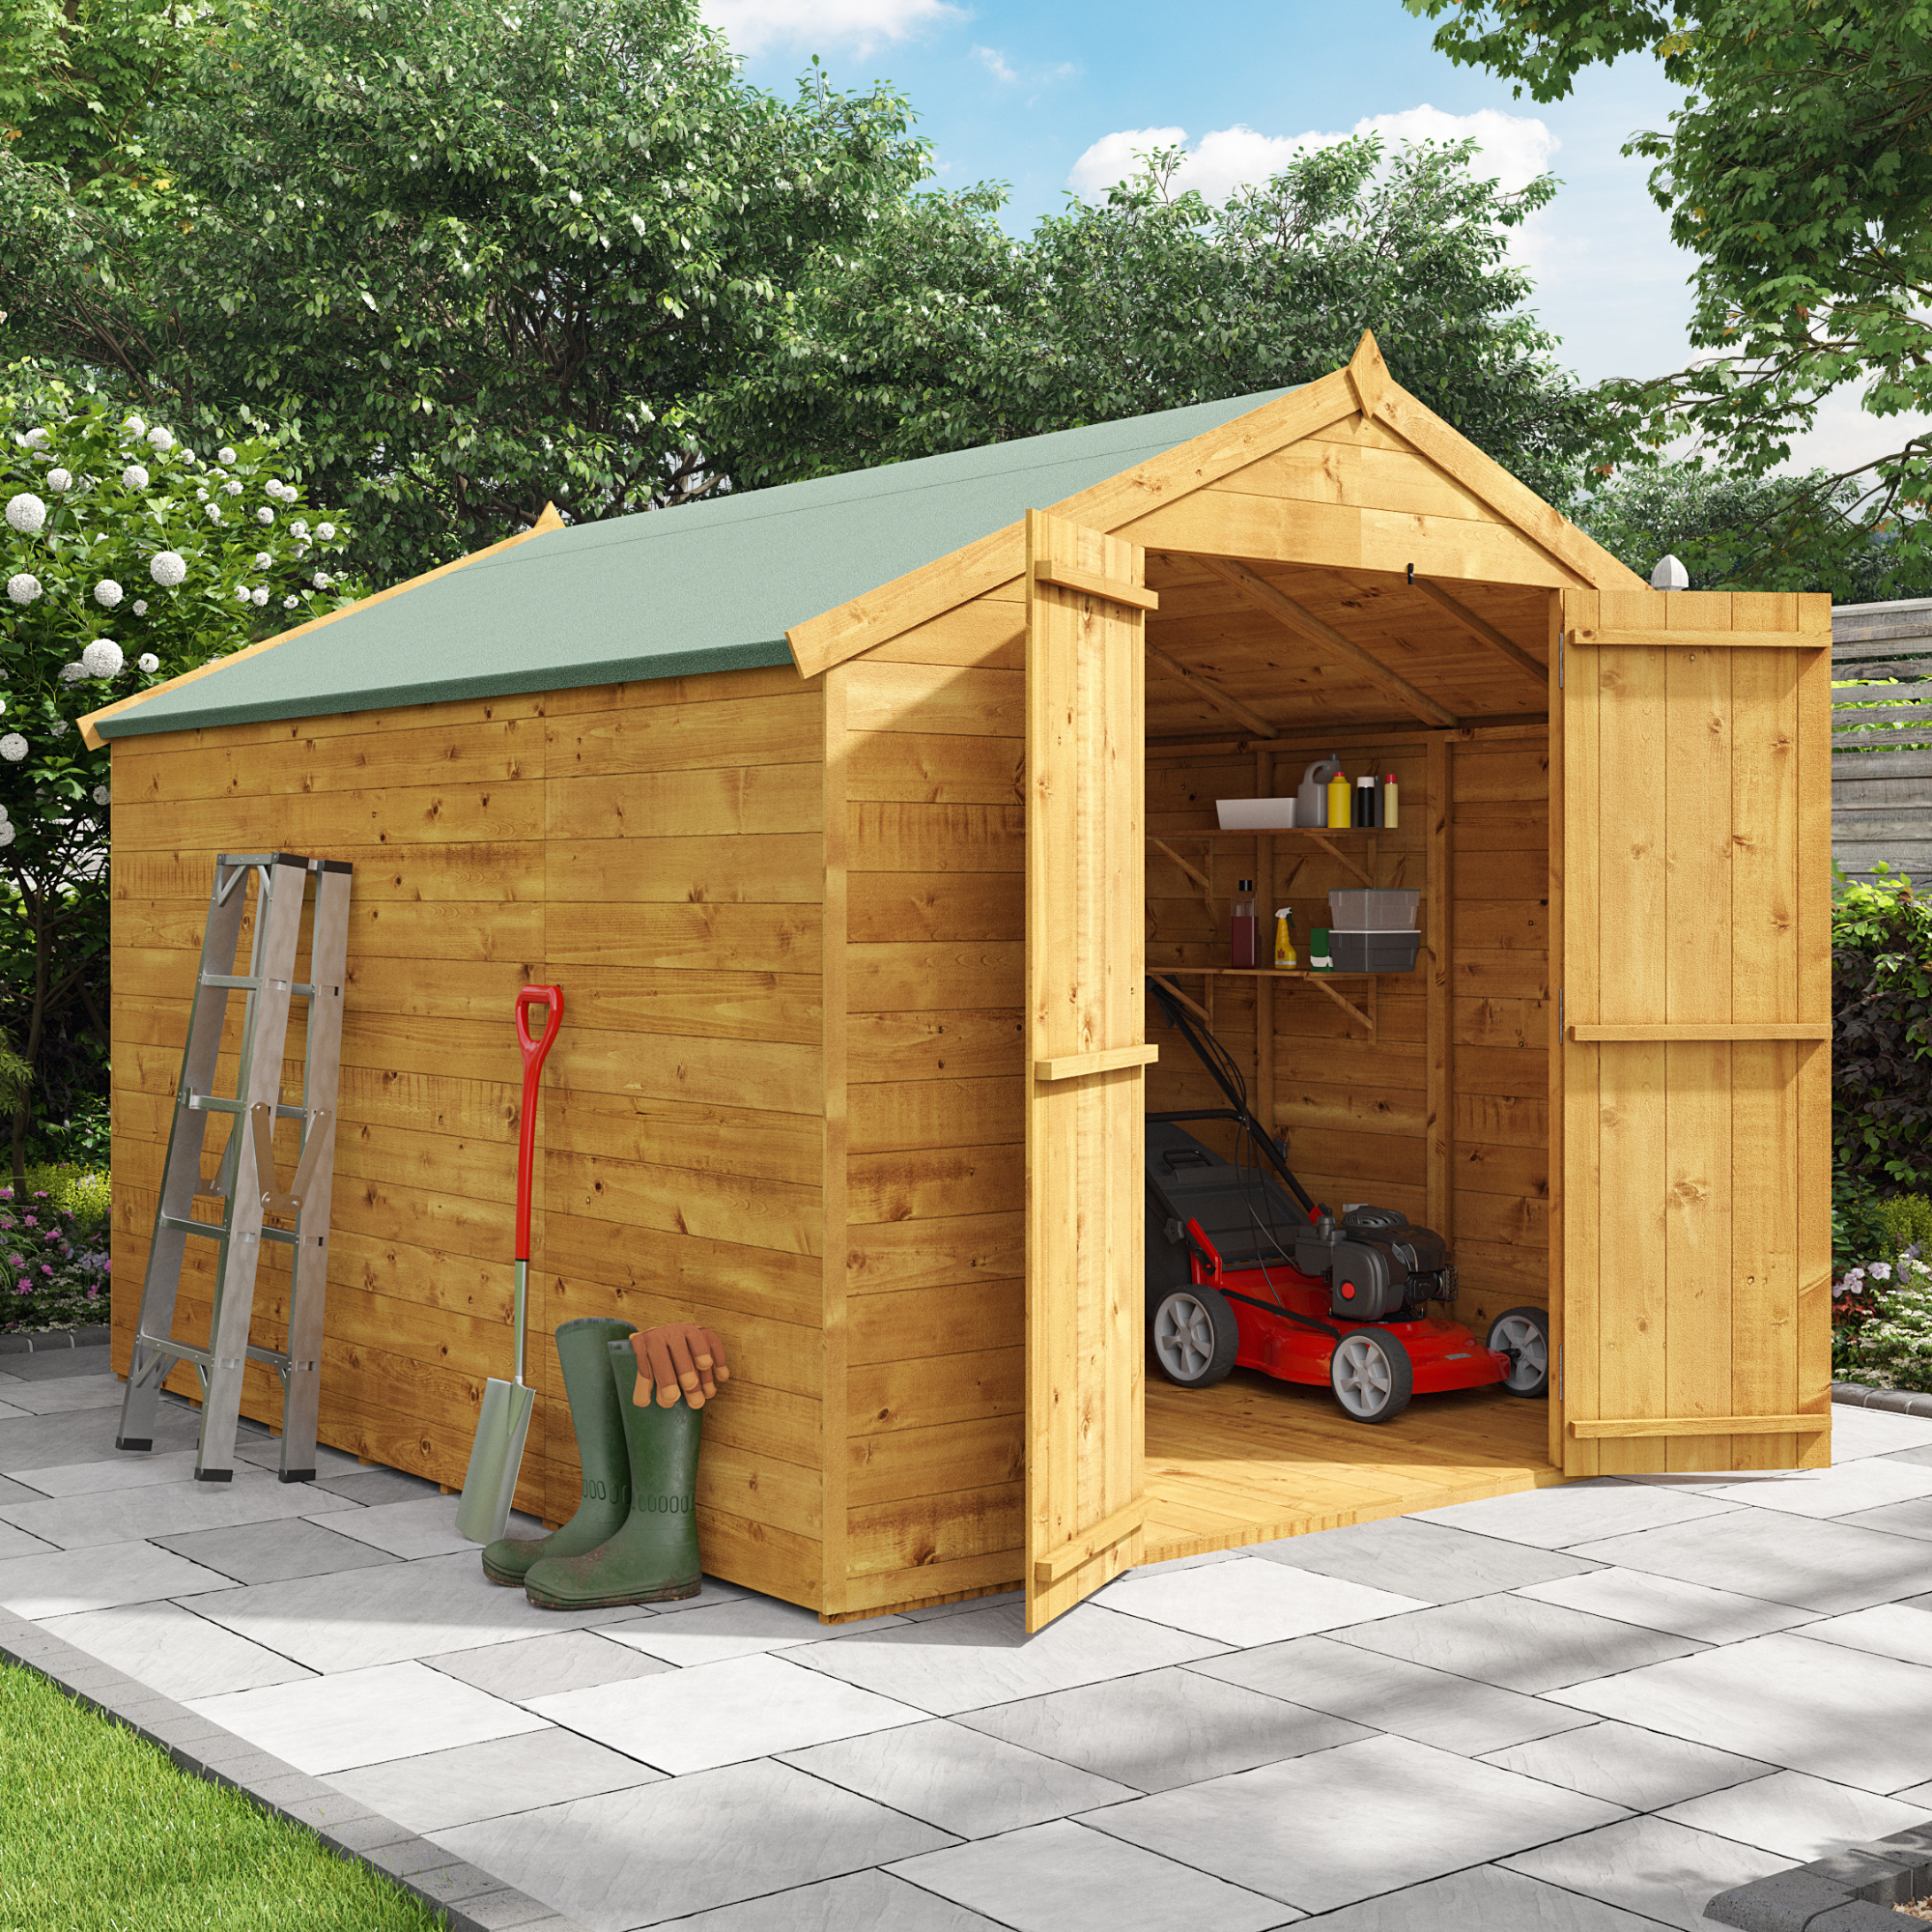 10 x 8 Shed - BillyOh Master Tongue and Groove Wooden Shed - 10x8 Garden Shed - Windowless